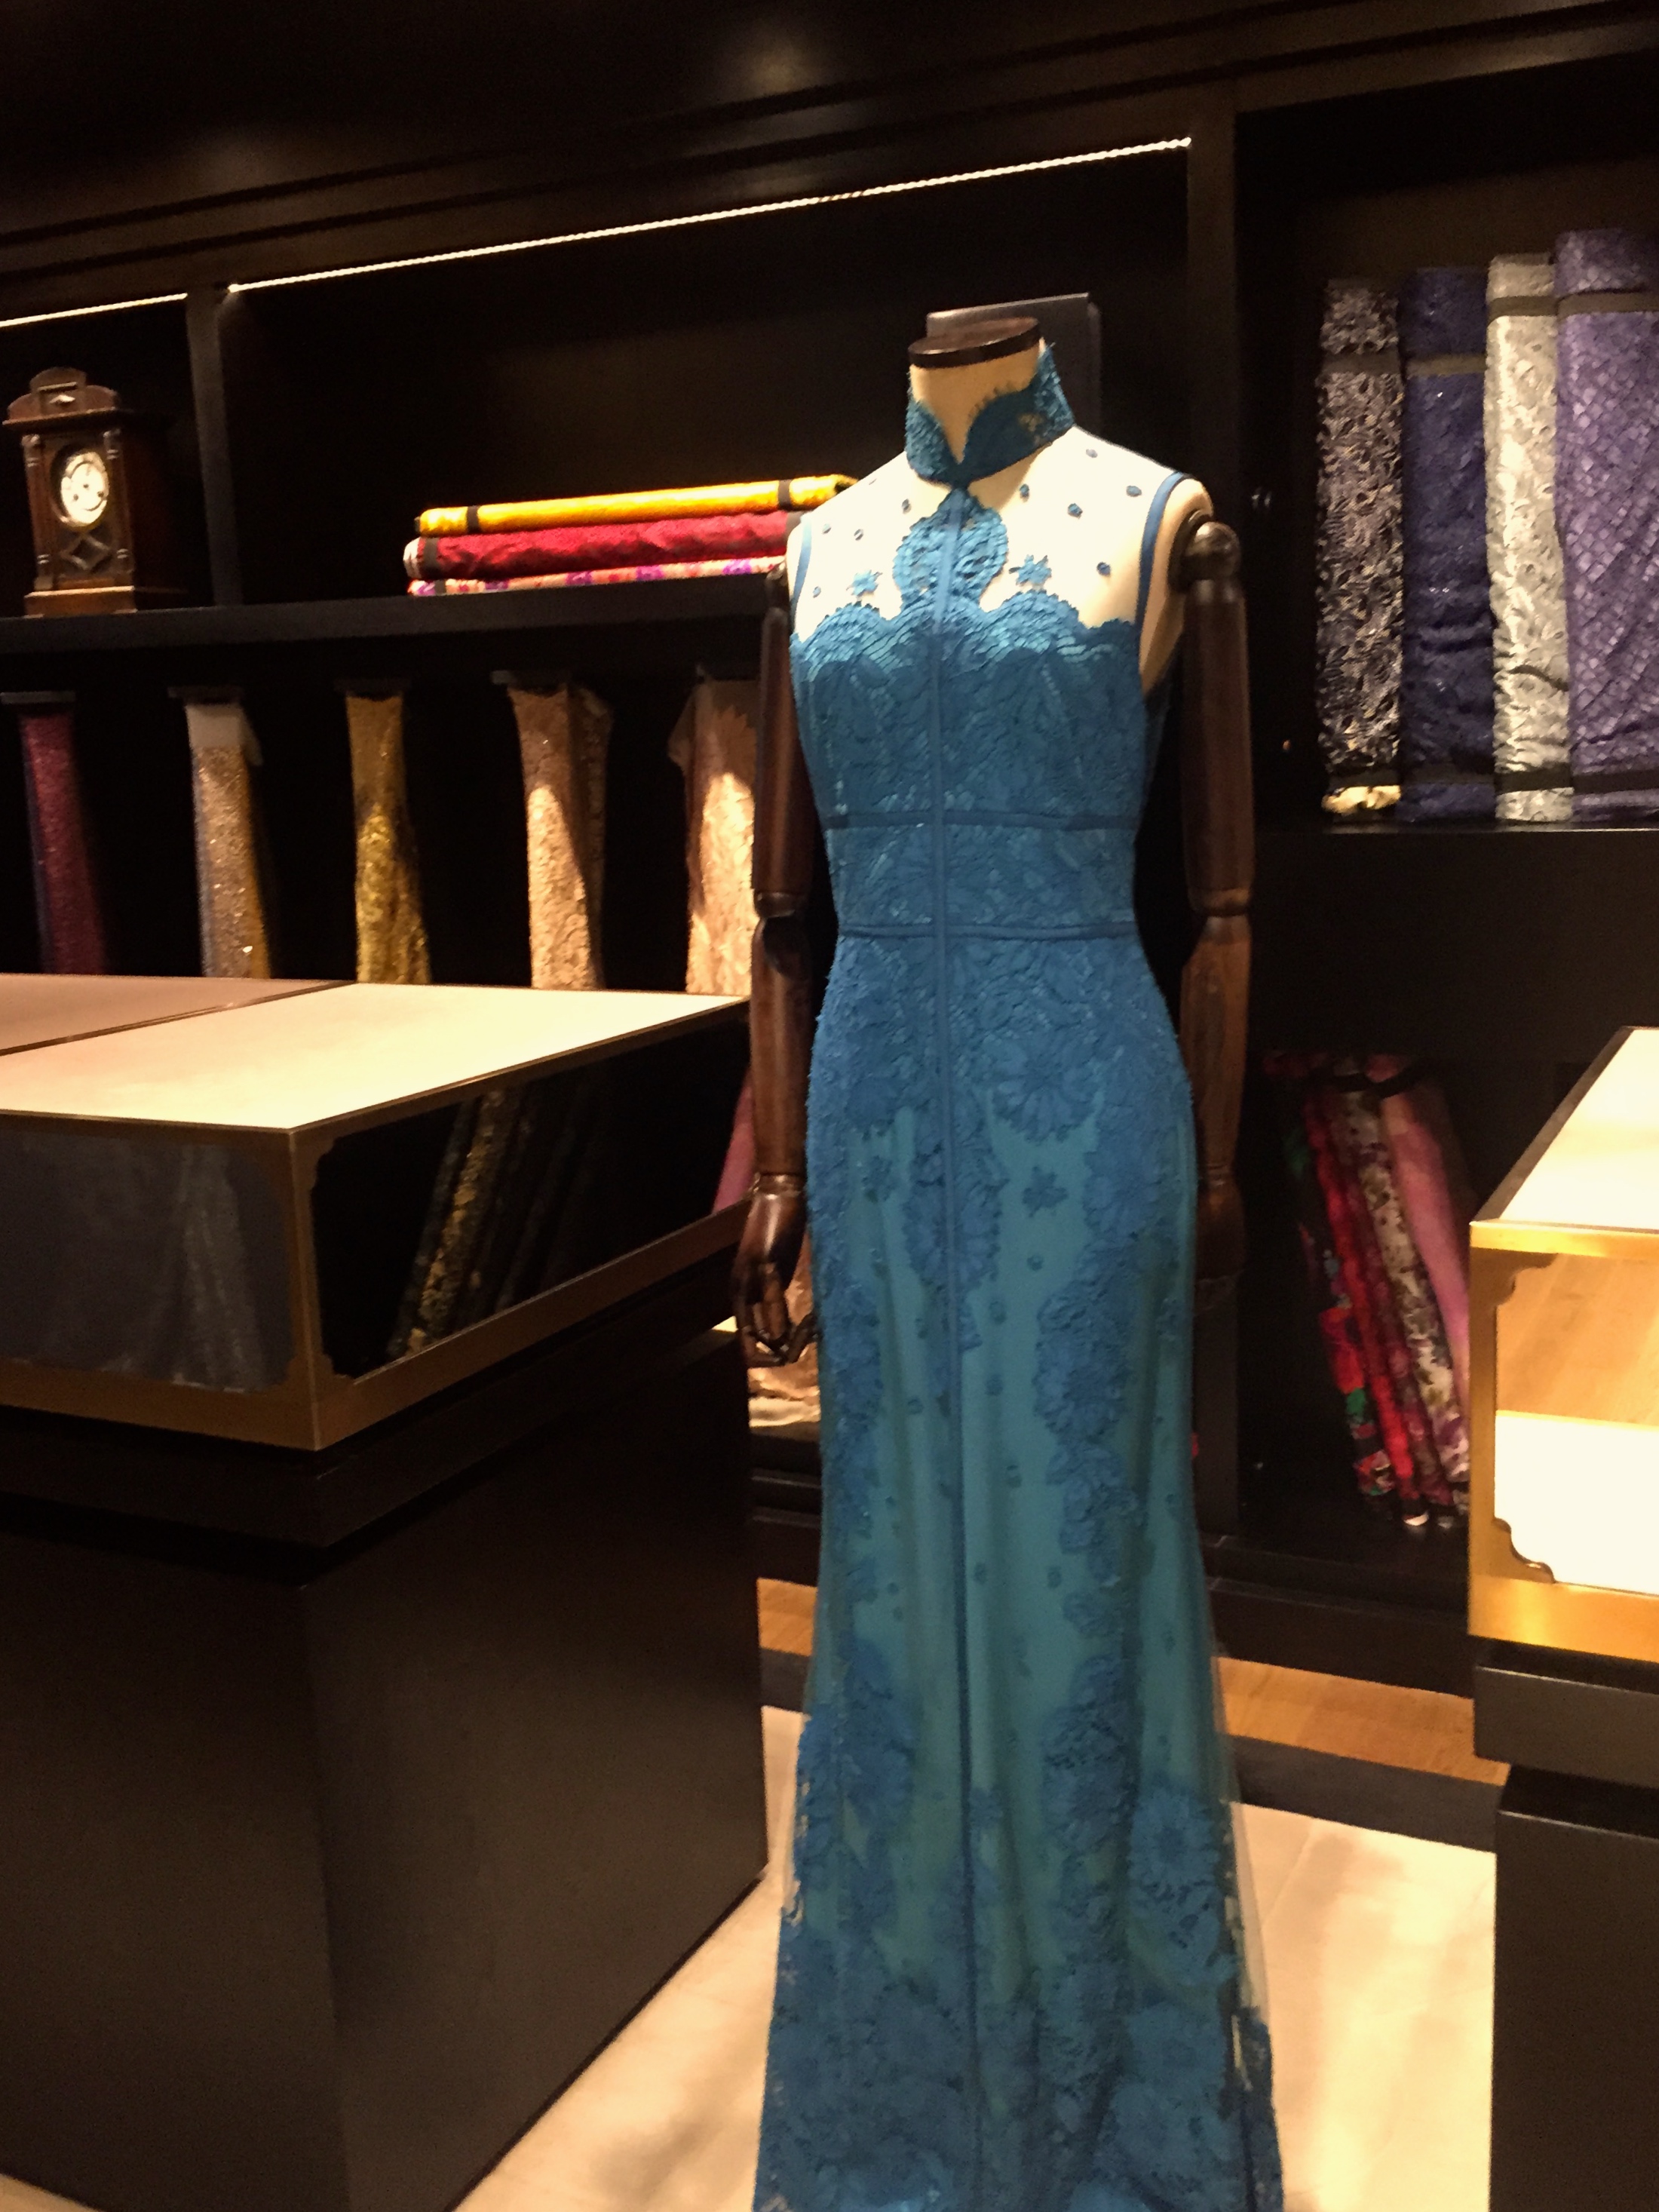 custom dresses in Shanghai Tang in Hong Kong via The Potted Boxwood.